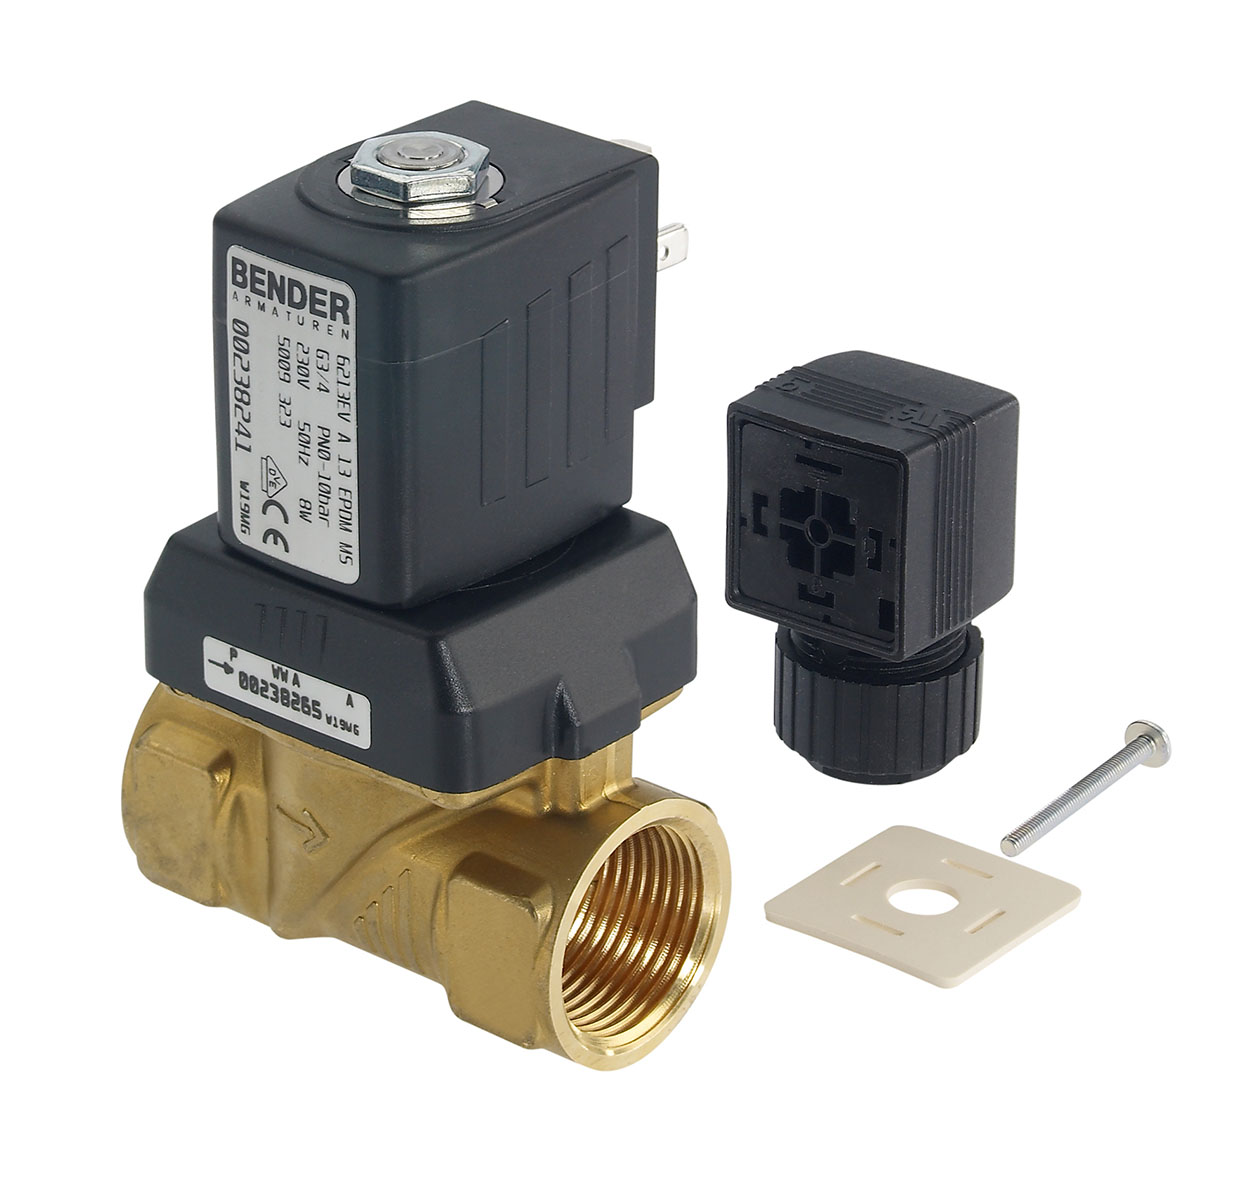 5009336 - 2/2 way solenoidvalve normally closed for fluids Type 1; female thread